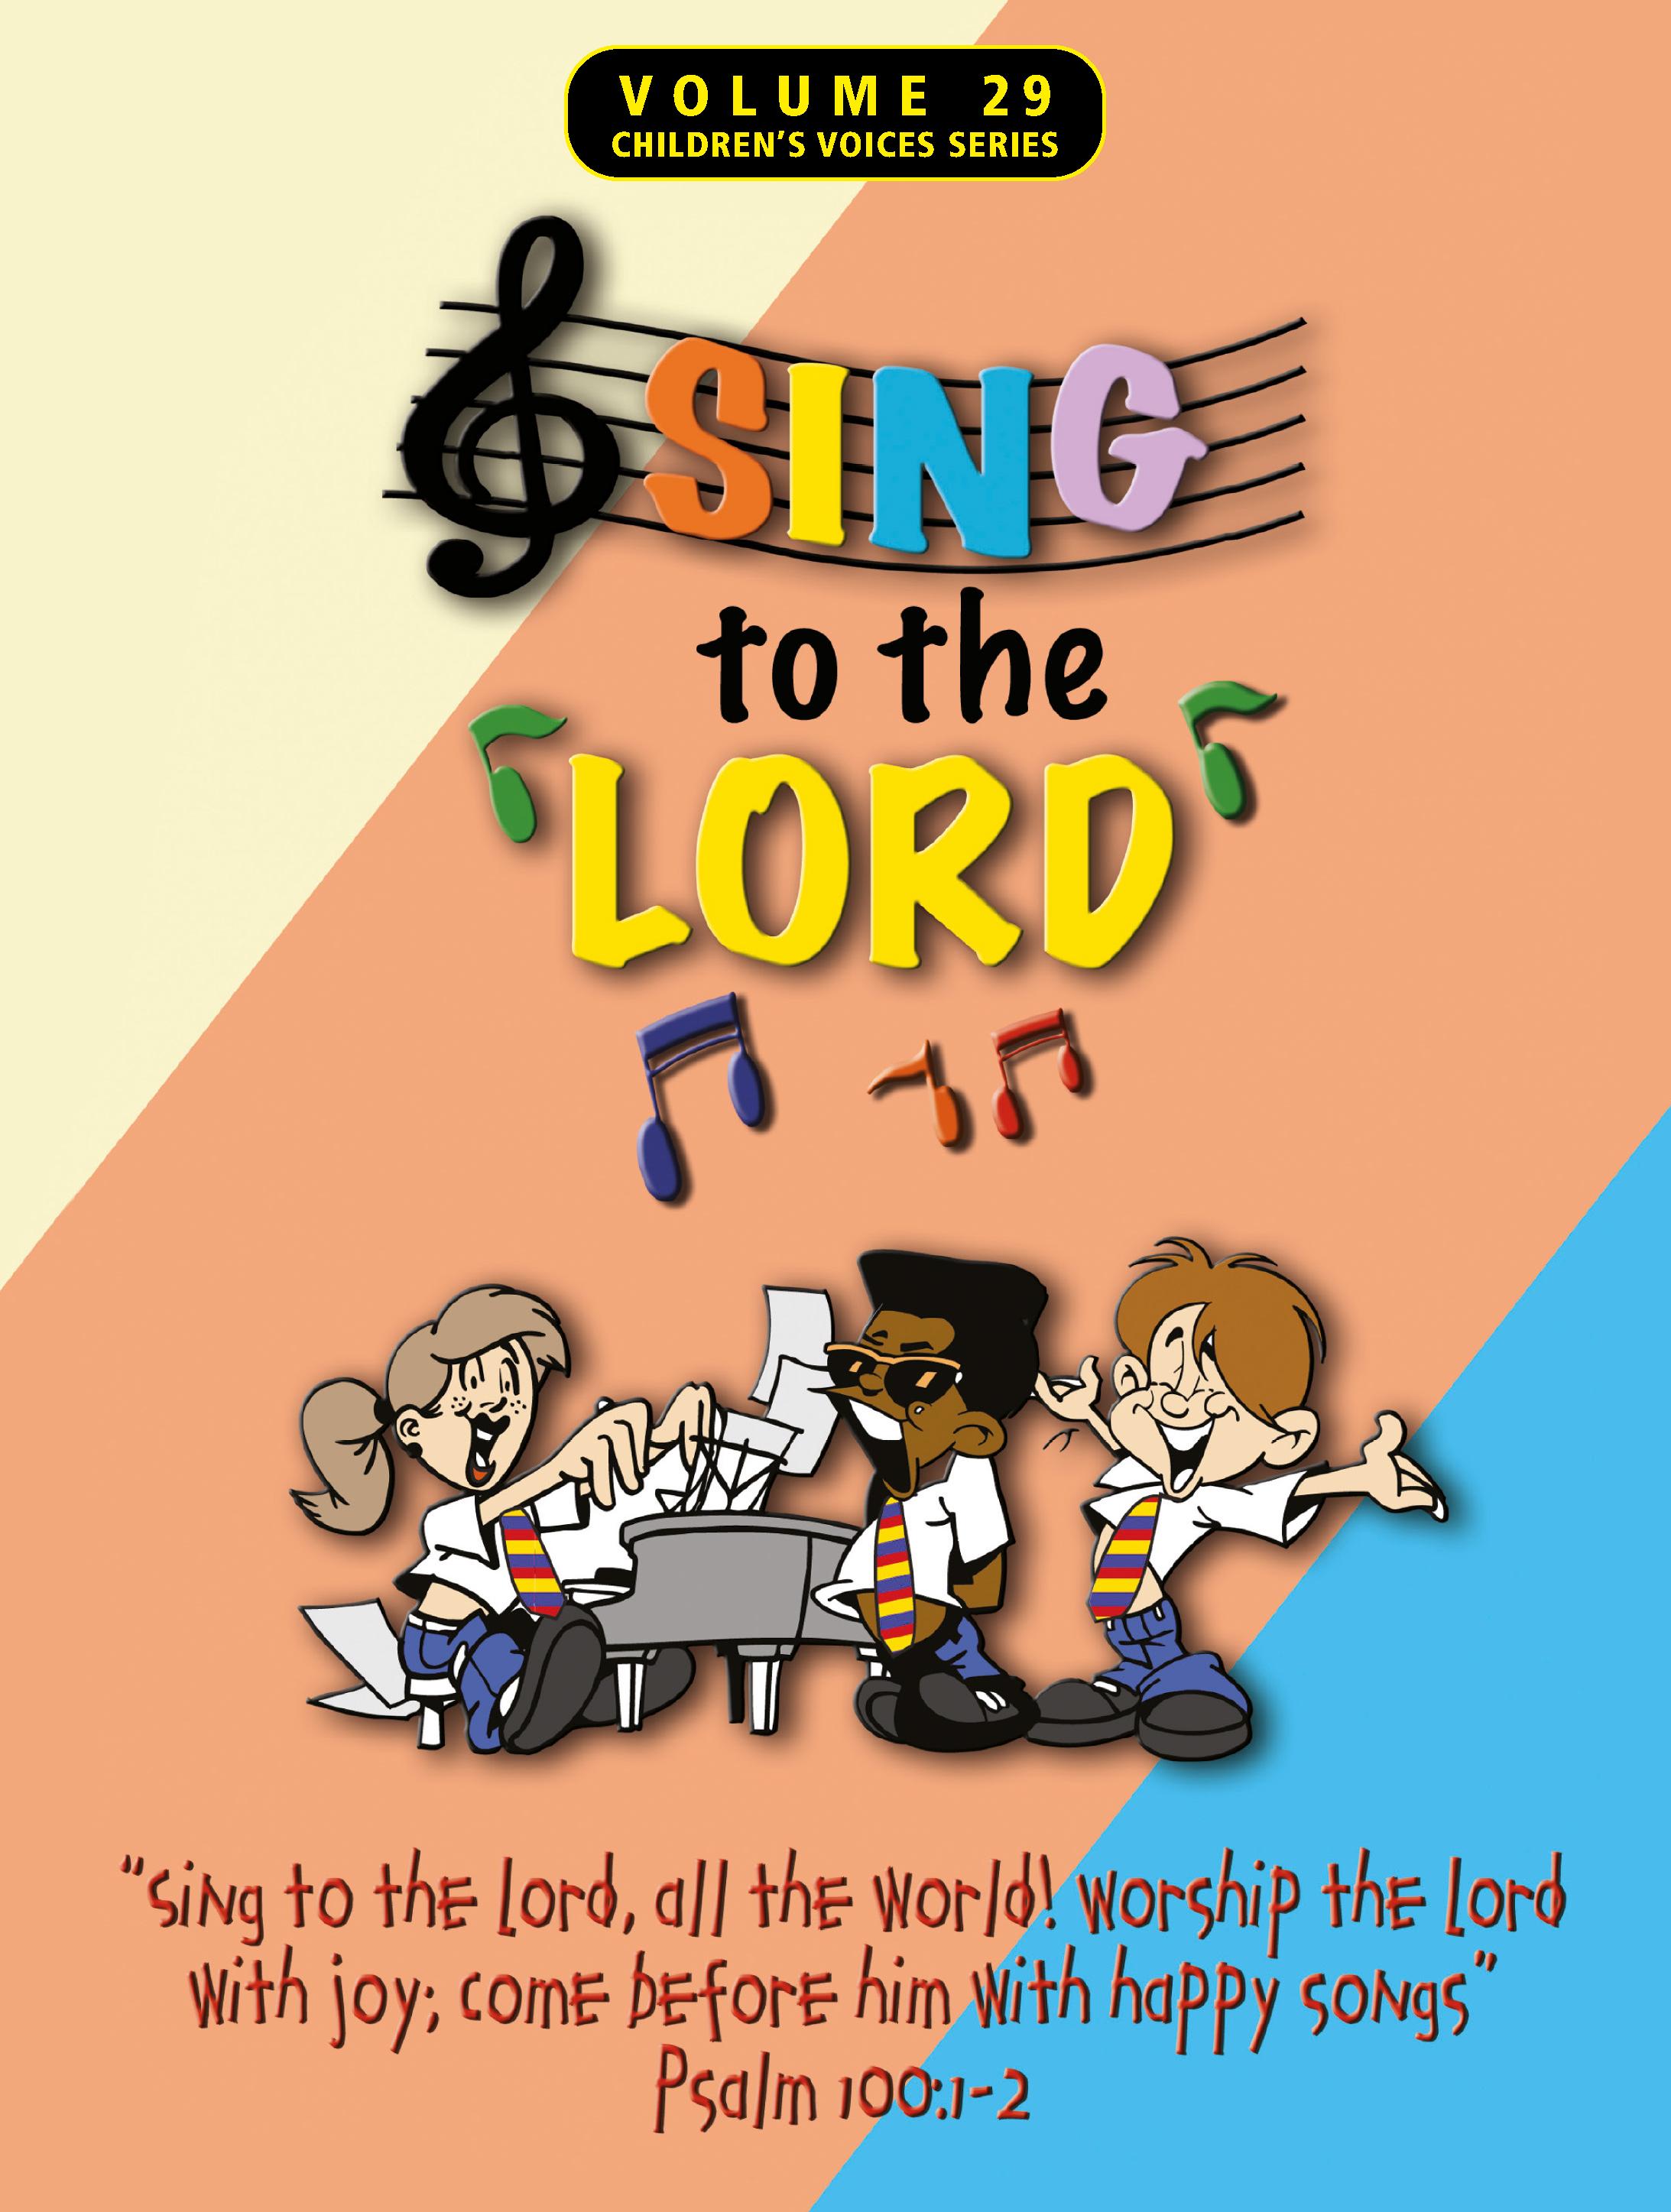 Sing to the Lord, Children's Voices, Volume 29